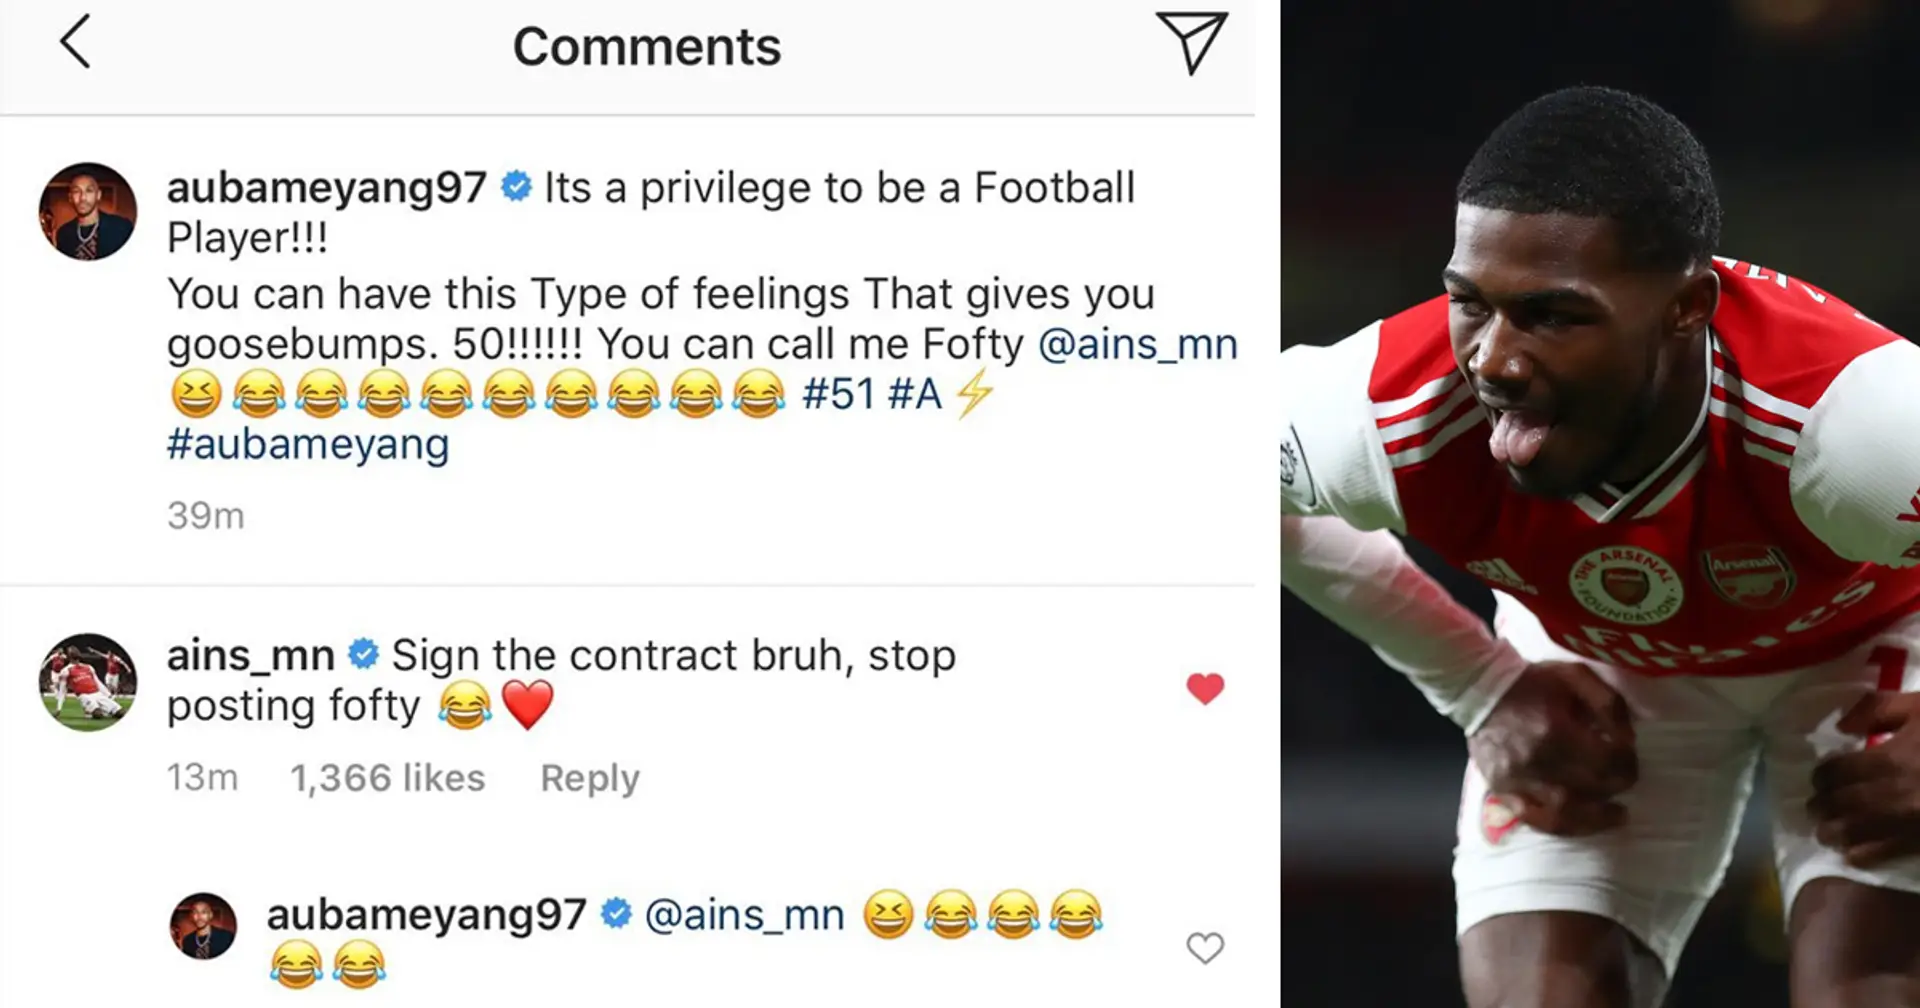 Niles urges Auba to sign in a hilarious Instagram comment